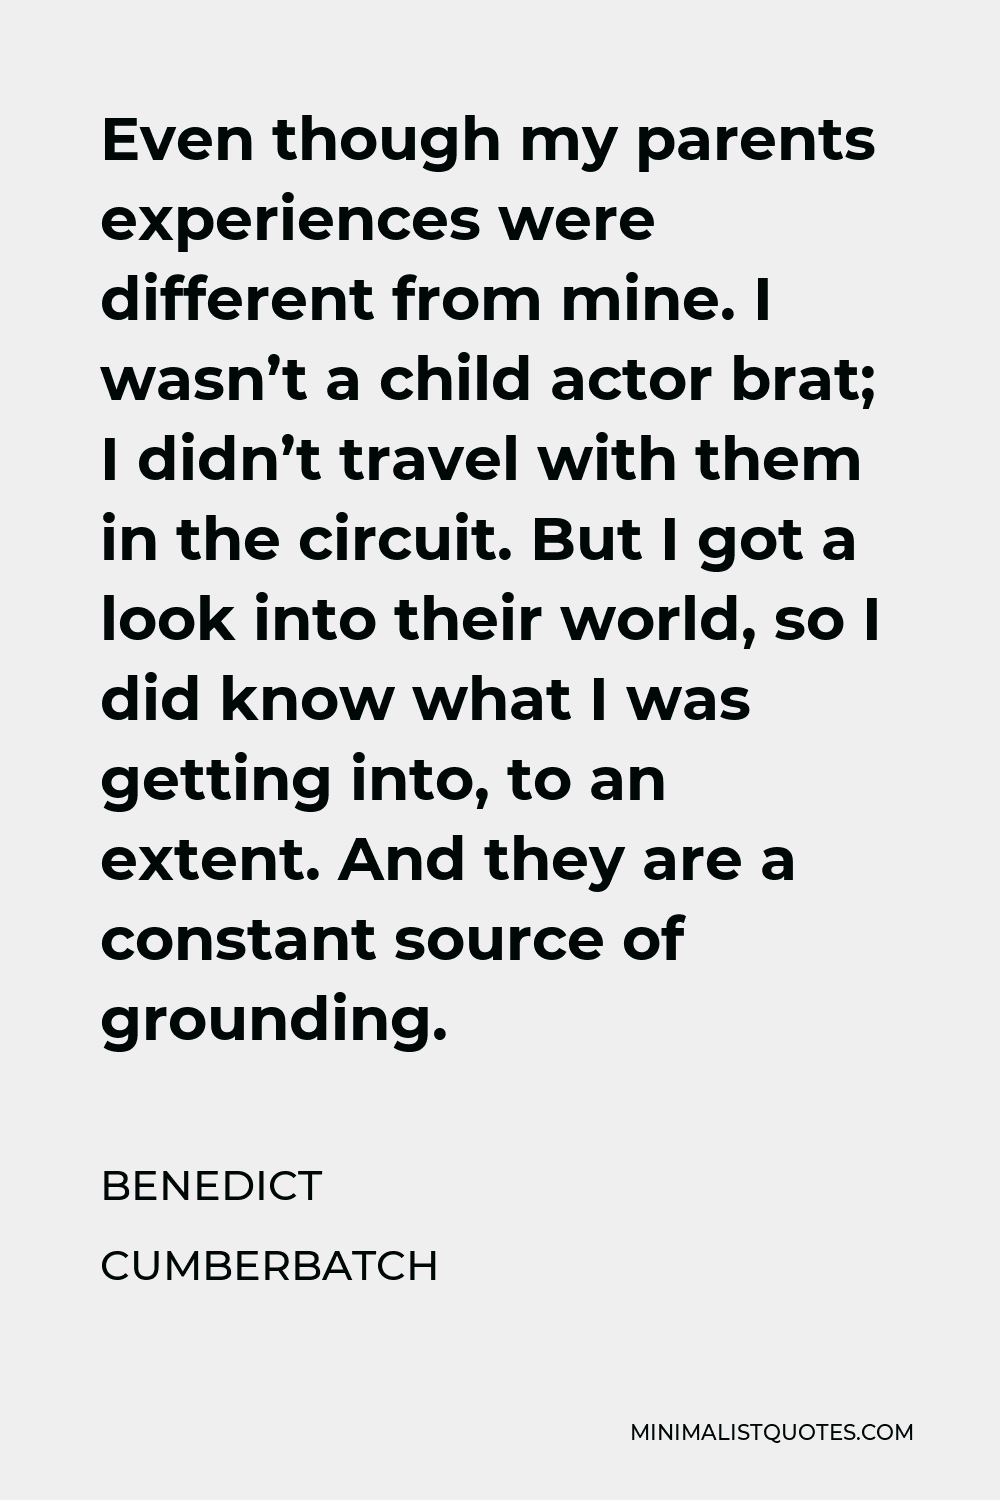 Benedict Cumberbatch Quote - Even though my parents experiences were different from mine. I wasn’t a child actor brat; I didn’t travel with them in the circuit. But I got a look into their world, so I did know what I was getting into, to an extent. And they are a constant source of grounding.